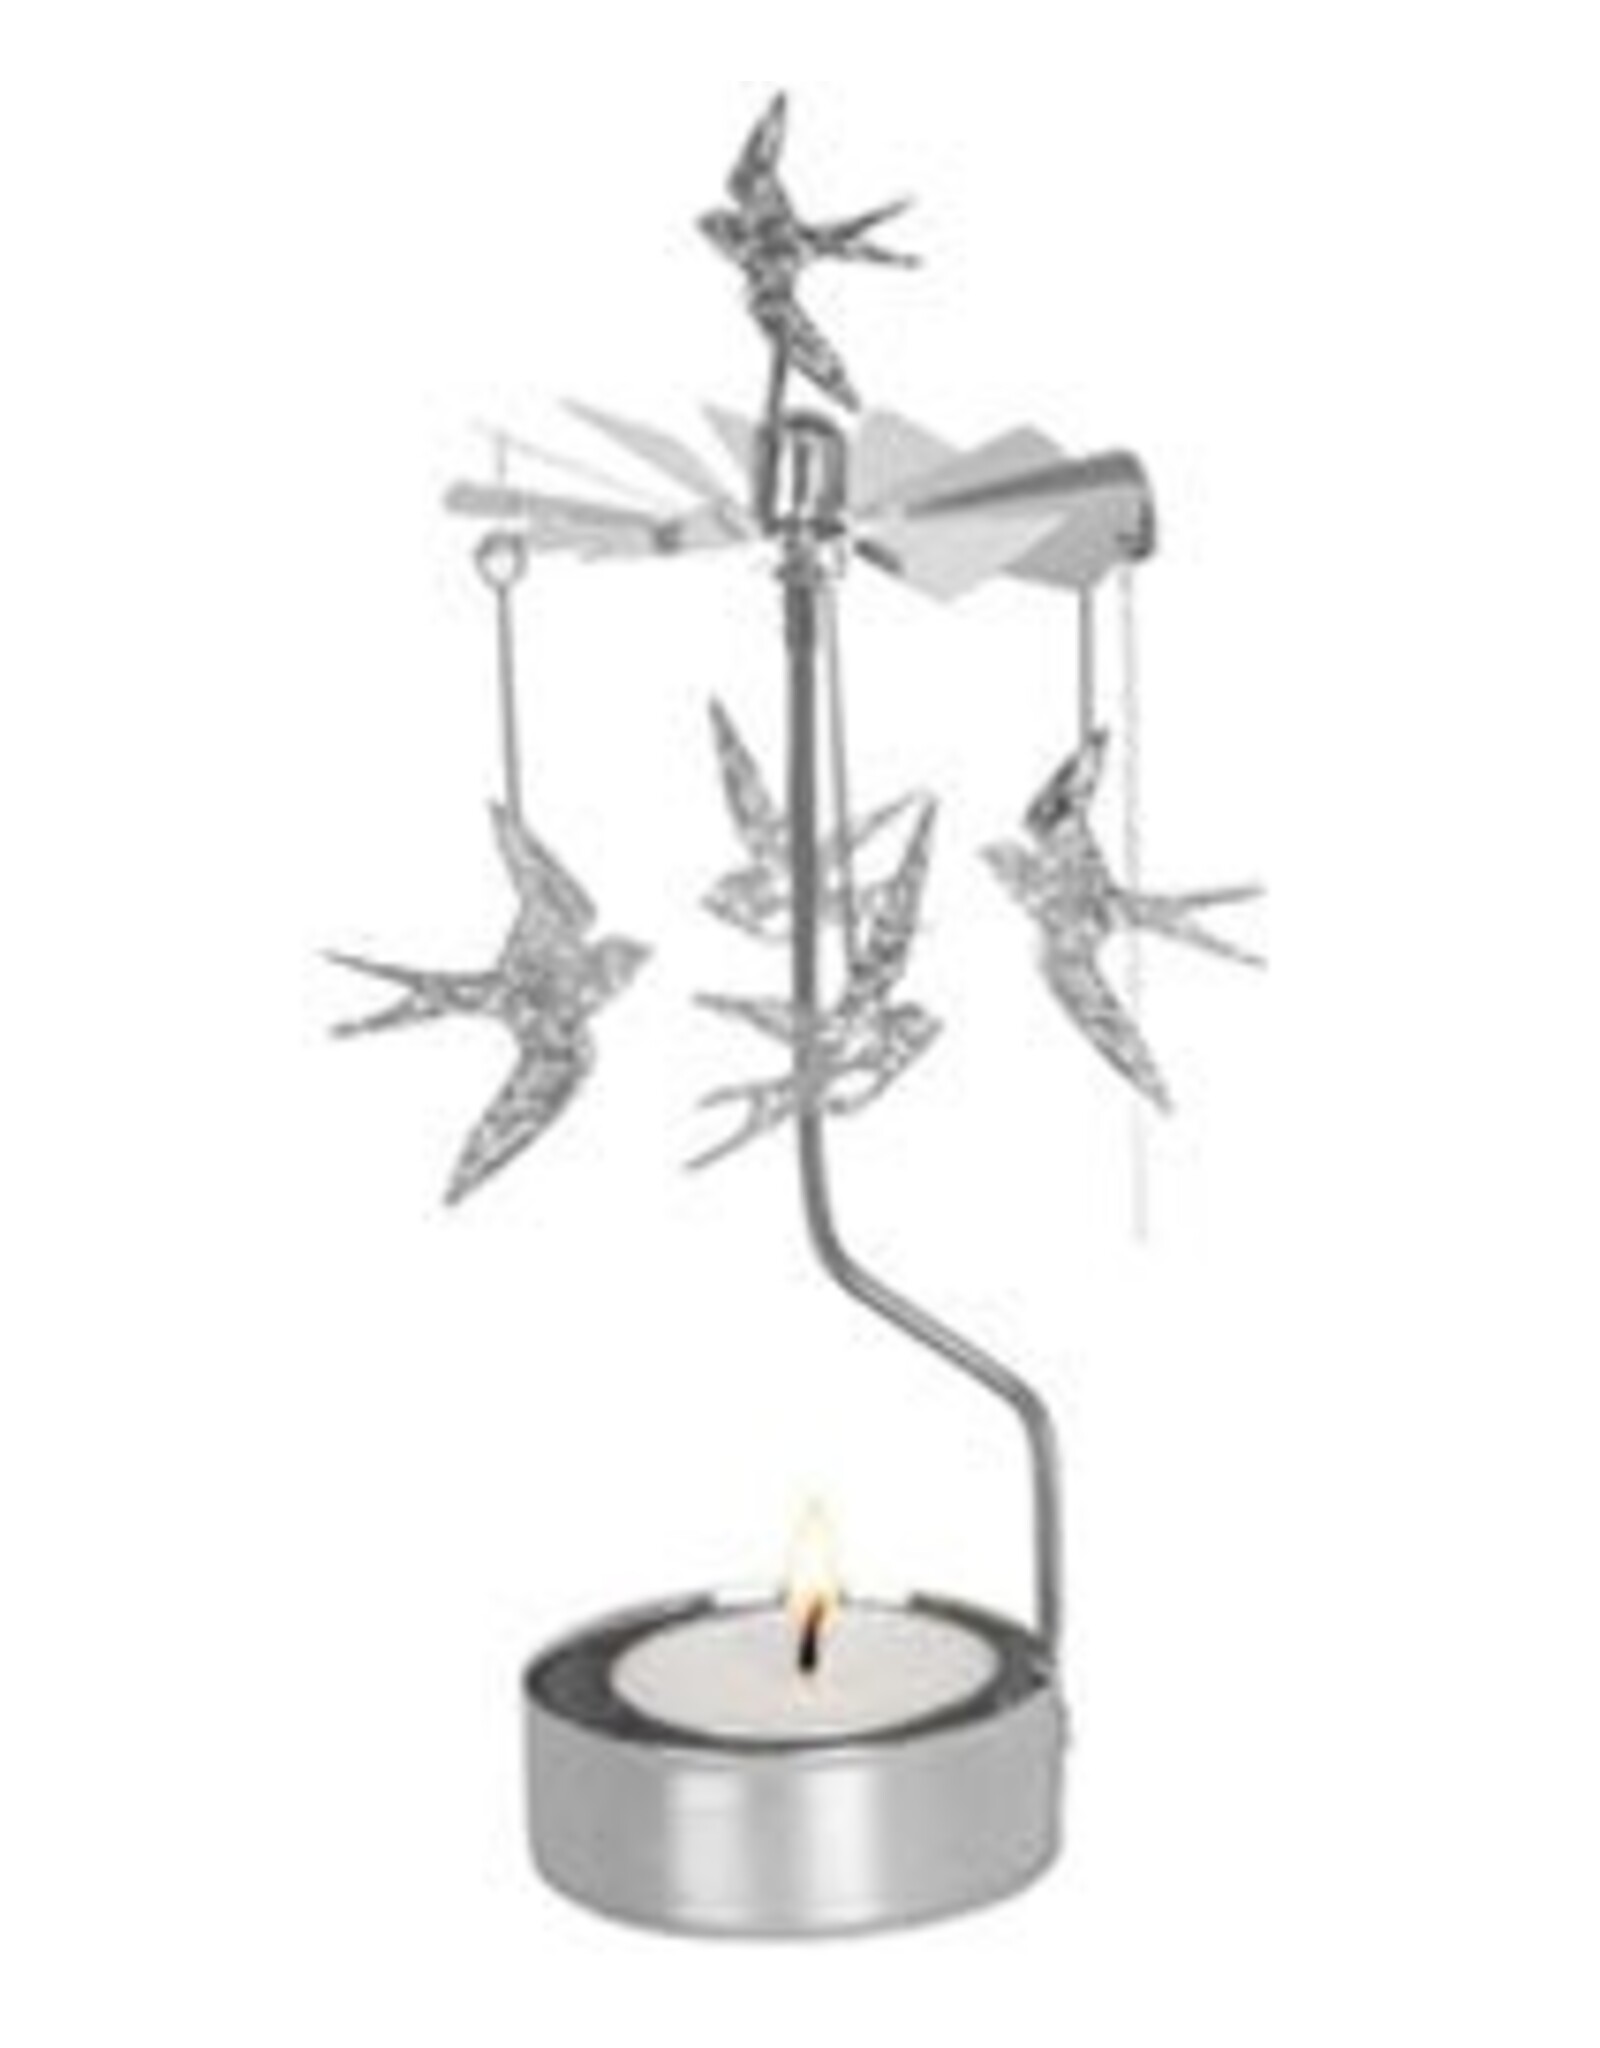 Silver Swallow Rotary Candleholder